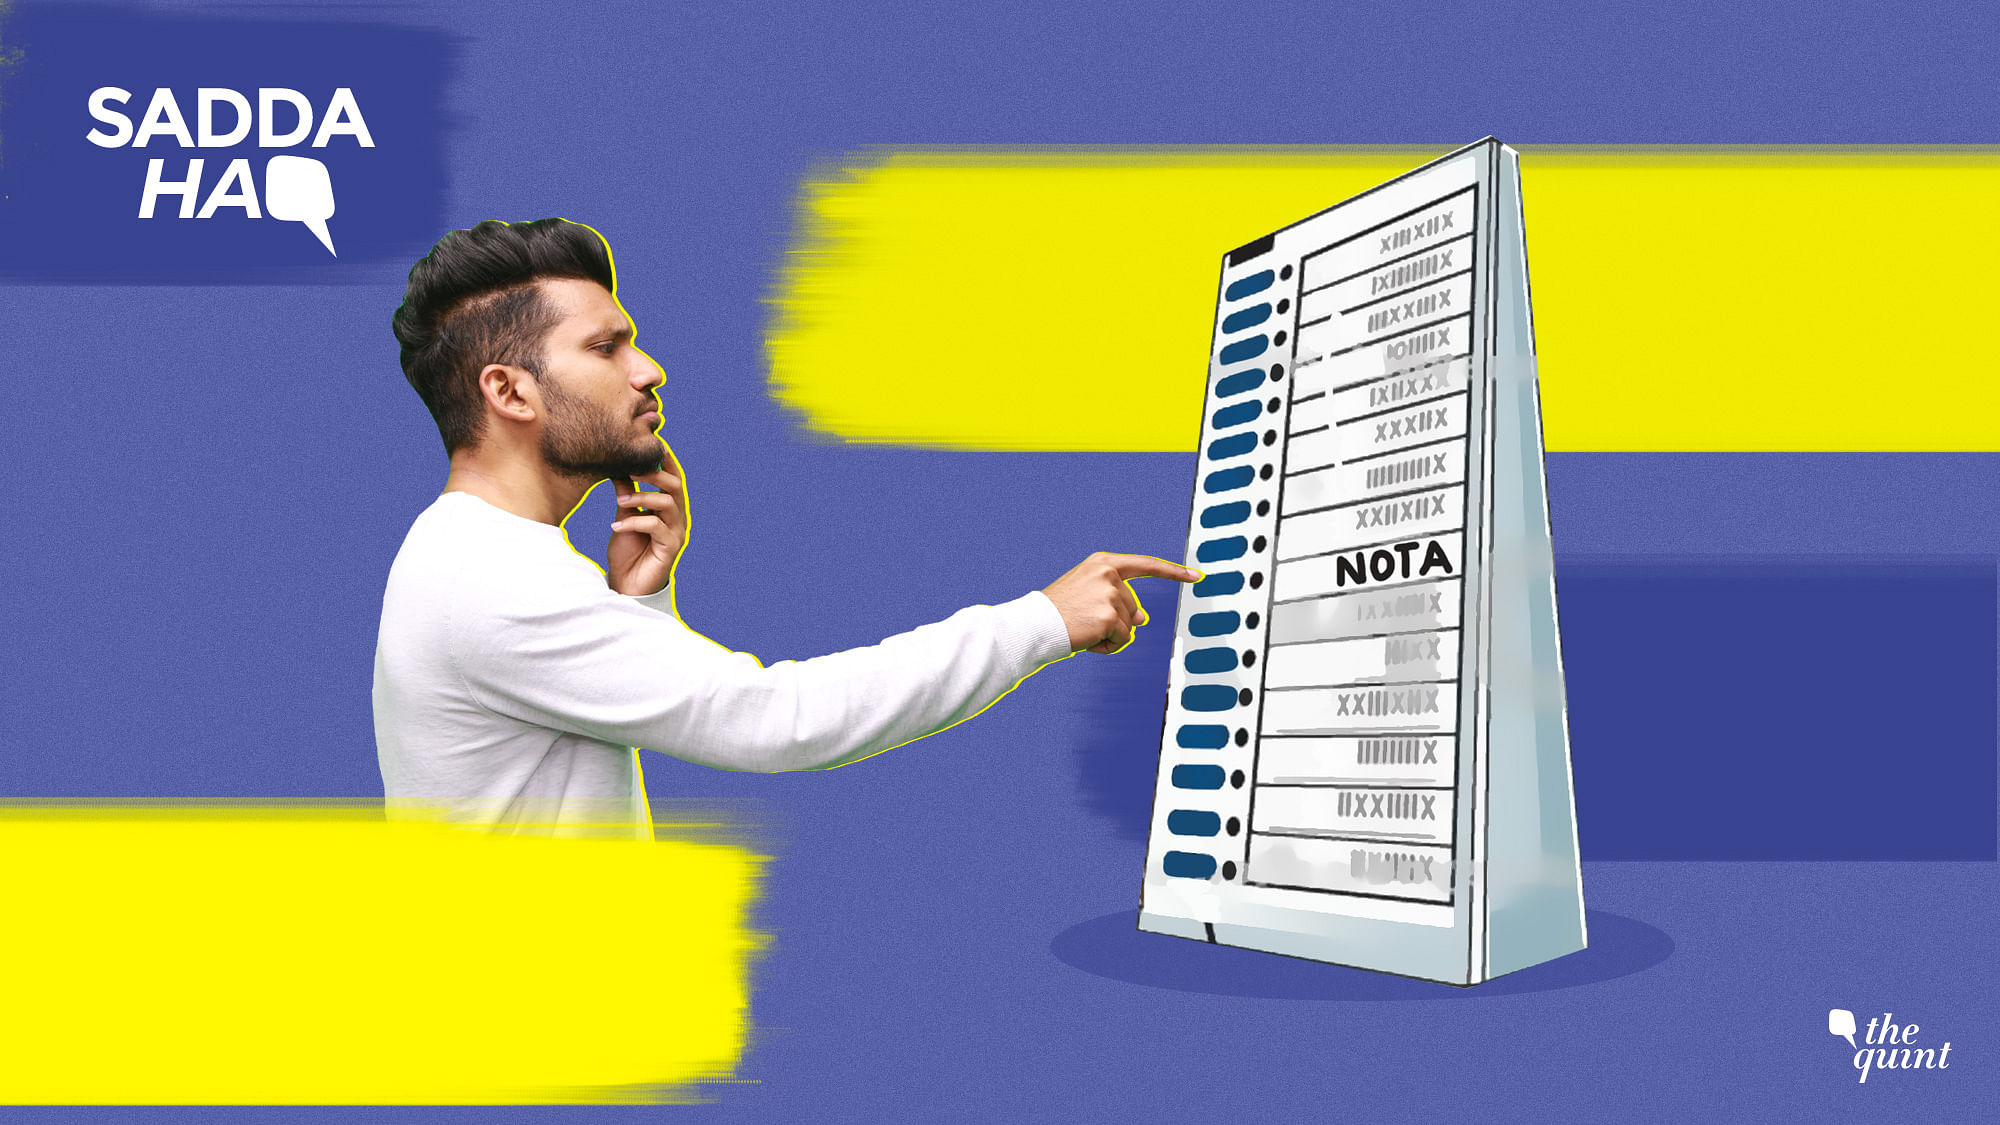 What happens when you press NOTA?